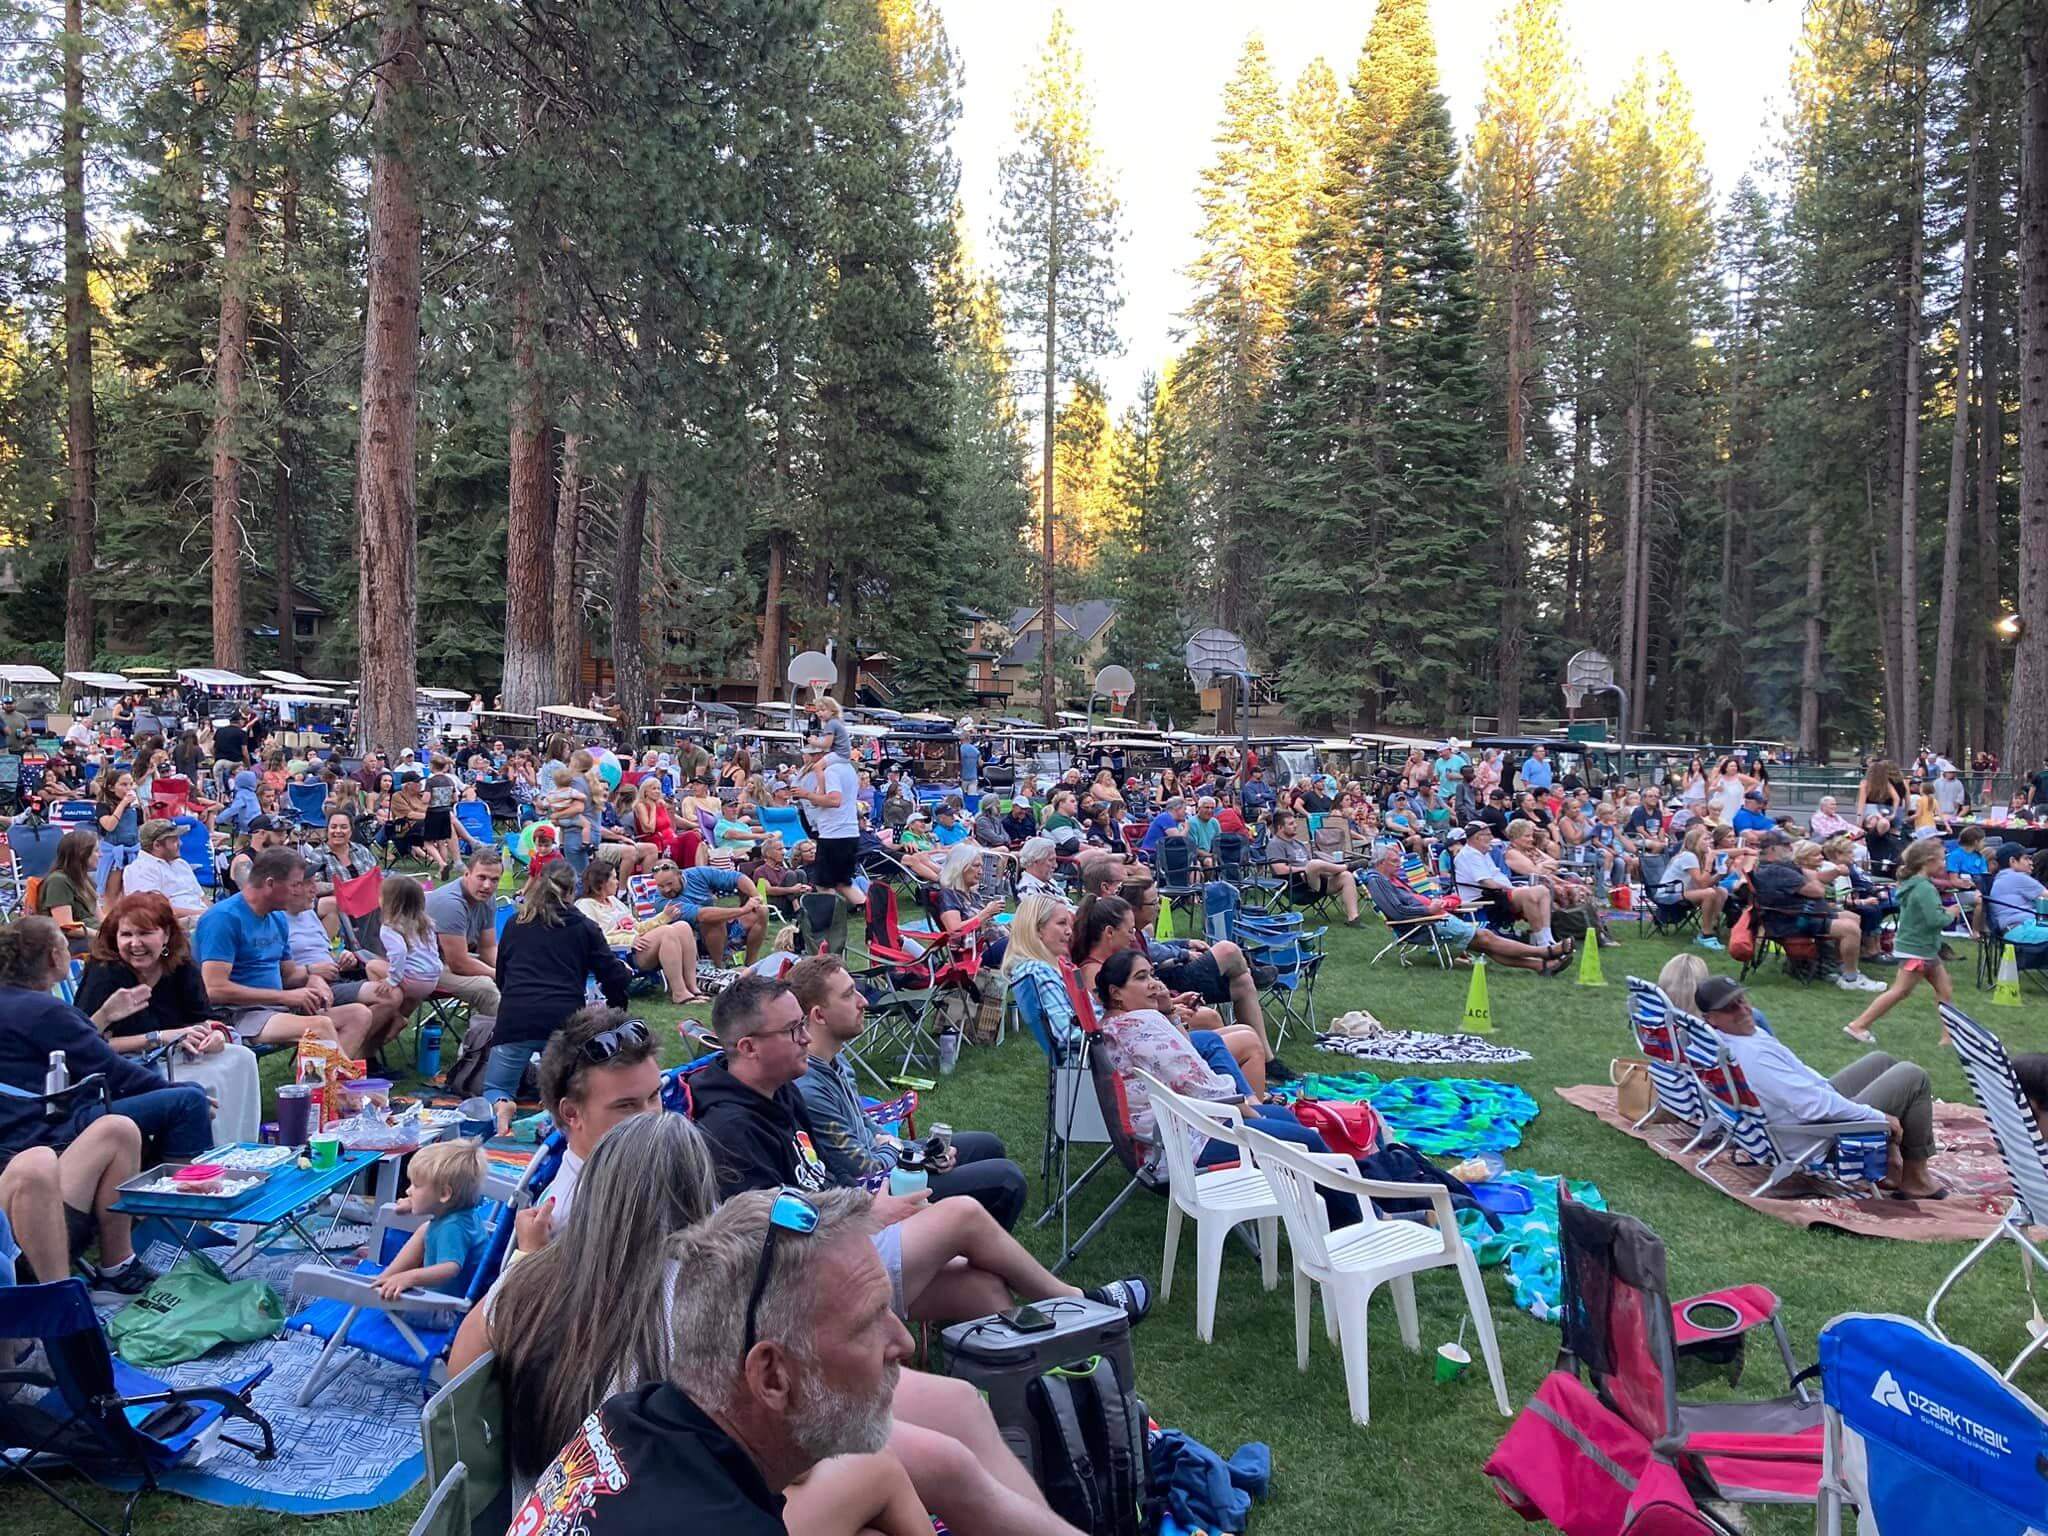 View of people in lawn chairs enjoying the music at the Lake Almnaor Country Club Music Series